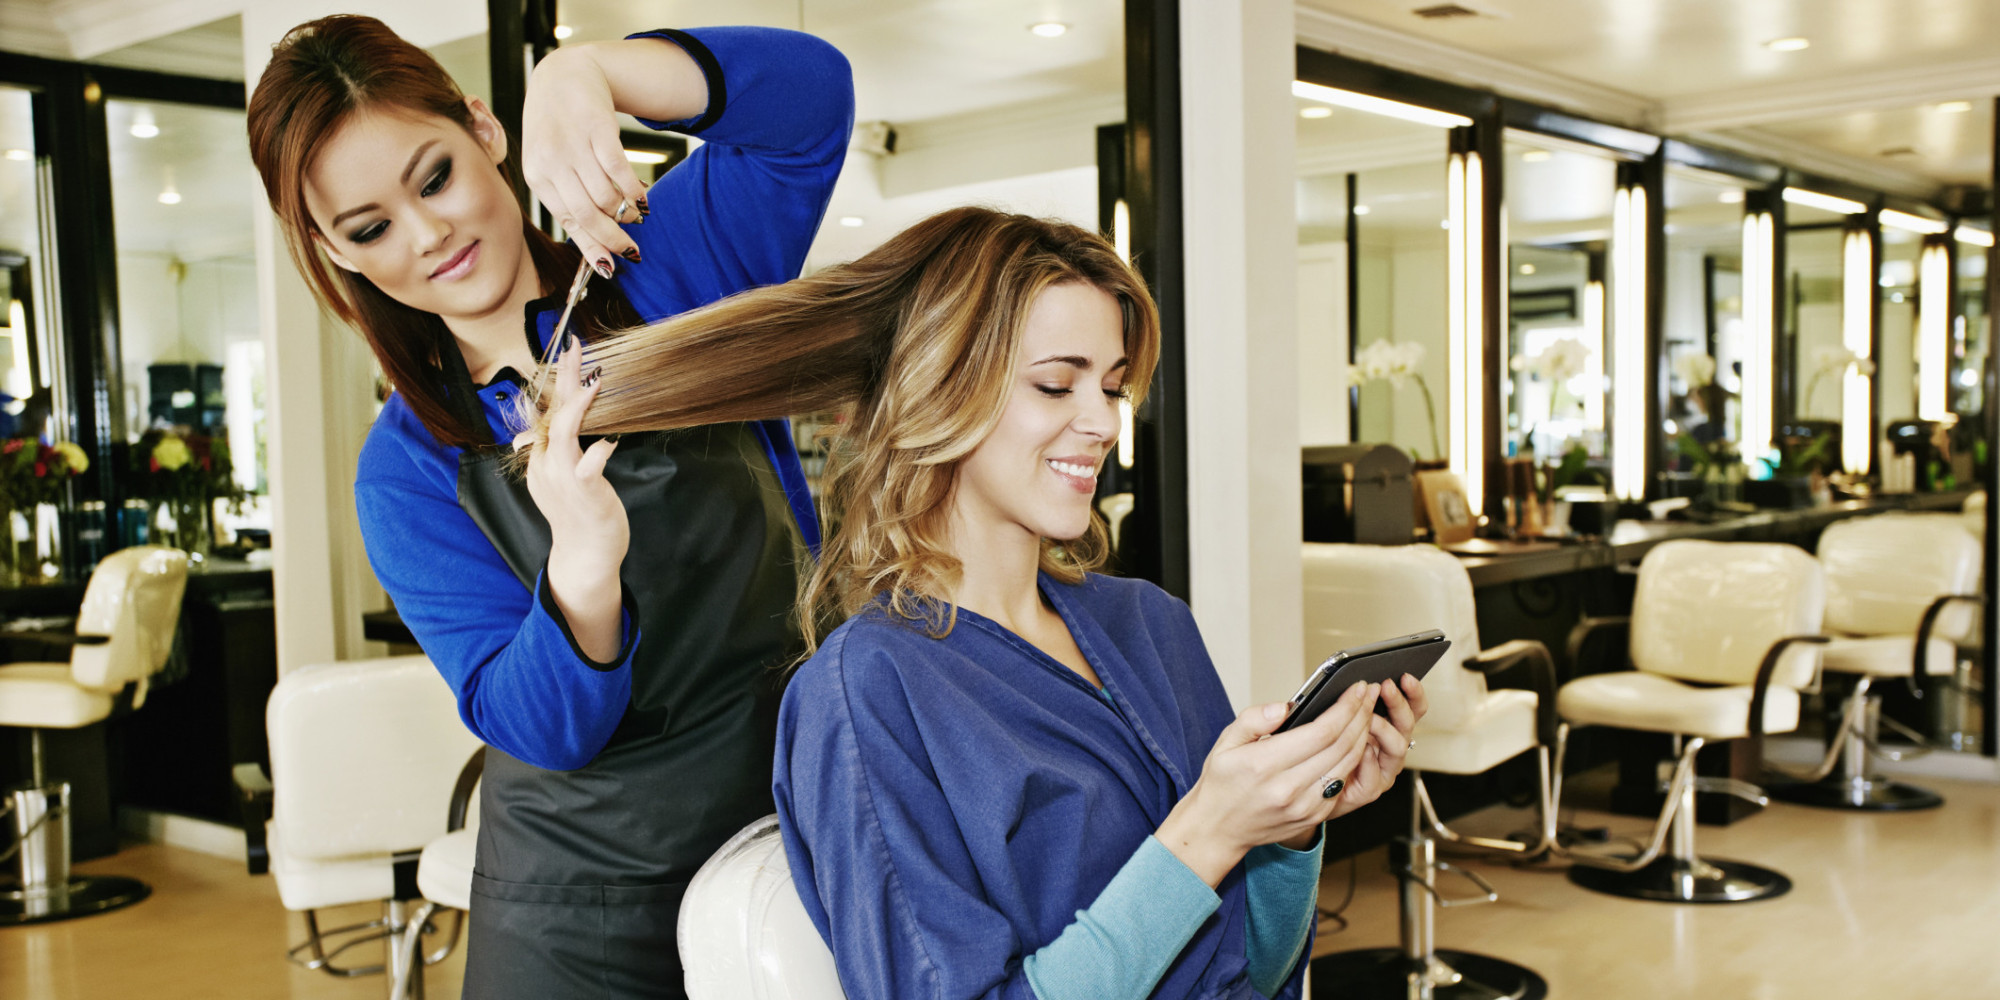 Cosmetology Rules Show Absurdity of Occupational Licensing Hilary Gowins